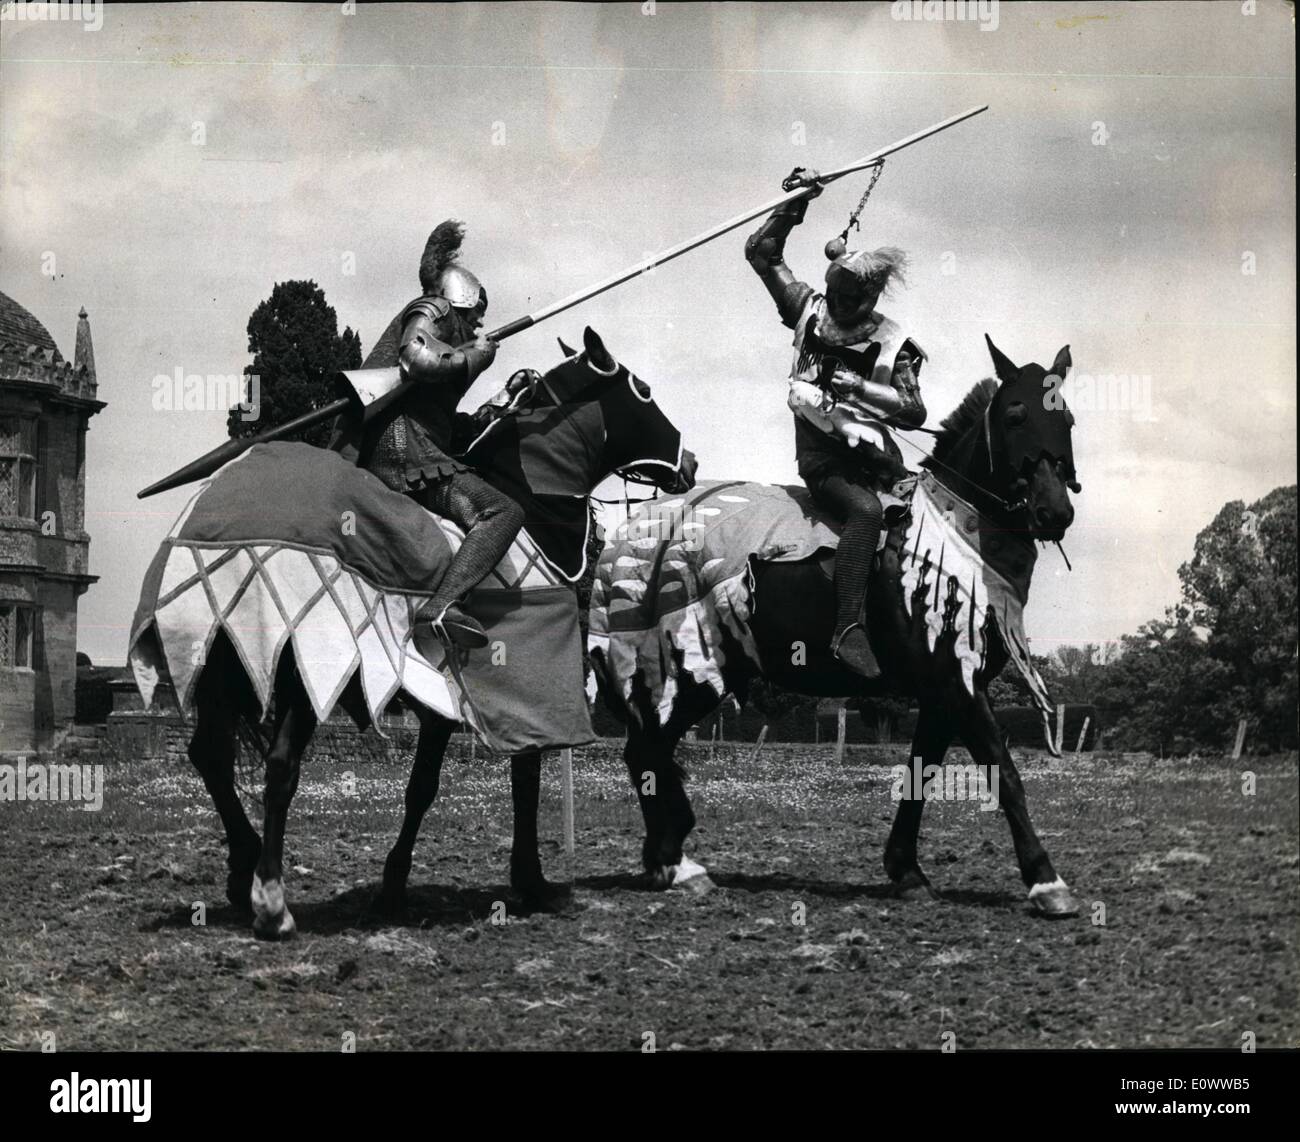 May 05, 1964 - Jousting - Down In Somerset.. Lances And ''Coshes''.... Jousting between knights armed with lances and swords will be seen in Britain again soon after 125 years. Seven top point-to-point horsemen will ''do battle'' at the Eilzabethan Montacute House, Yeovil, Somerset. It is all part of the &pound;2,500 one-day sports tournament to be run by the National Trust. compete in armour - ''Knights'' were to be seen in training. Keystone Photo Shows:- Lieut. Ralph Cowdy (Left) with lance battles on horseback with Lieut. Micheal Goodbody who swings a ''Cosh'' (19th Stock Photo